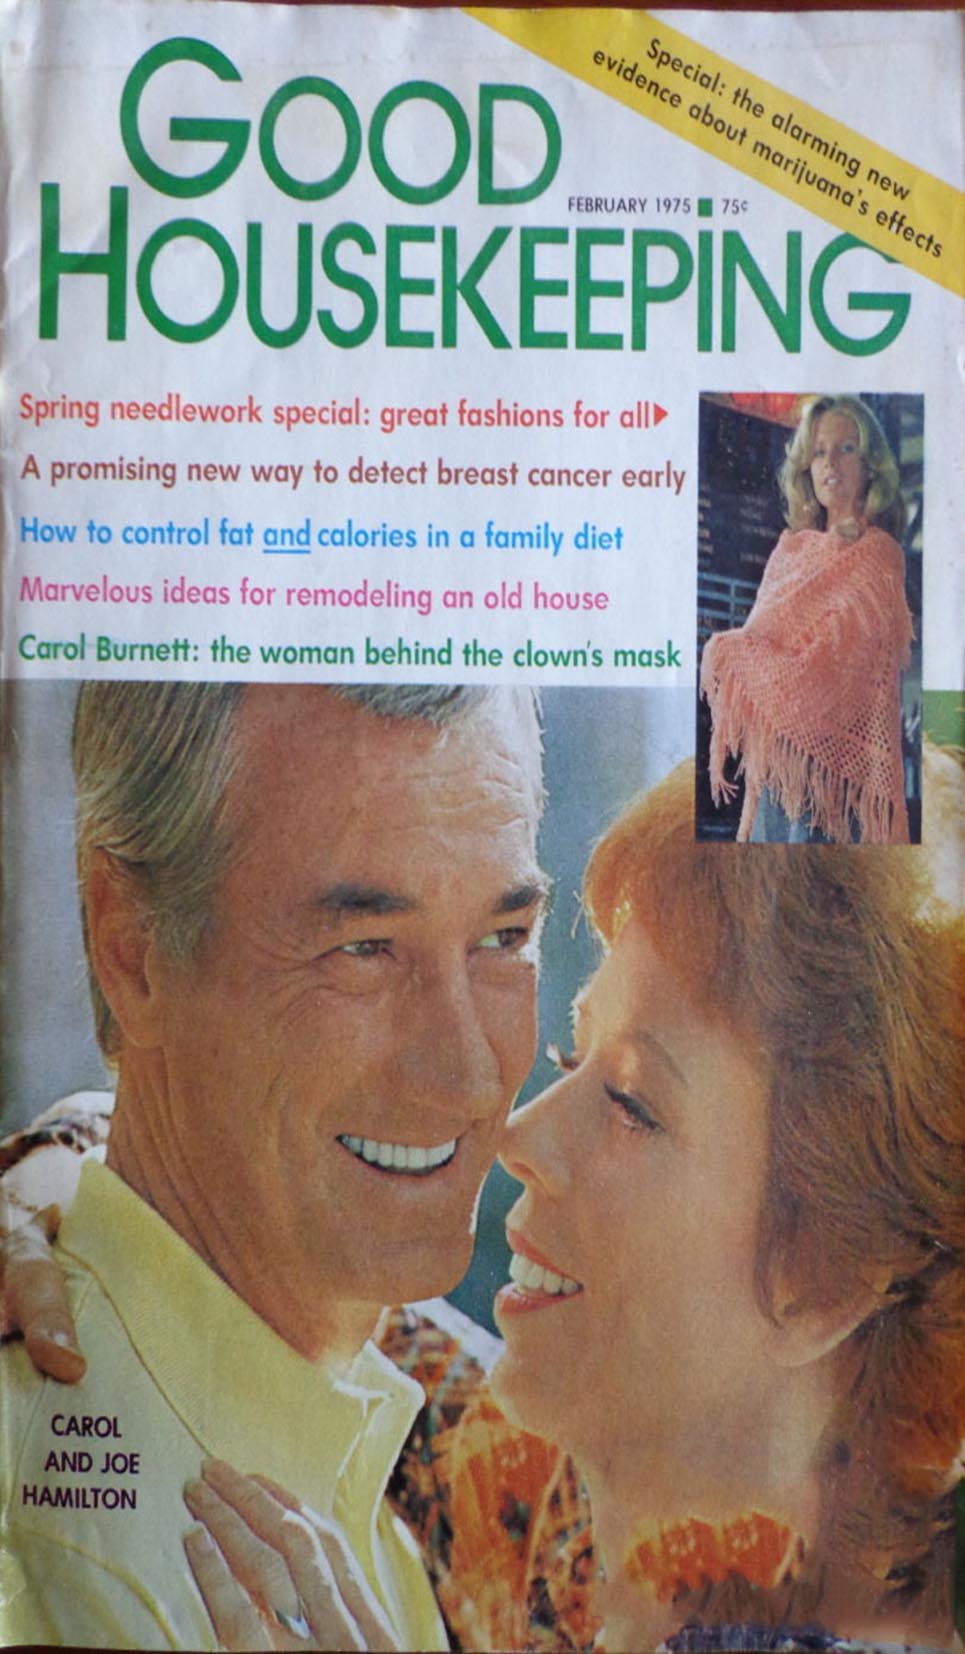 Good Housekeeping February 1975 magazine back issue Good Housekeeping magizine back copy Good Housekeeping February 1975 American womens magazine Back Issue Published by Hearst Publishing Corporation. Spring Needlework Special: Great Fashions For All.